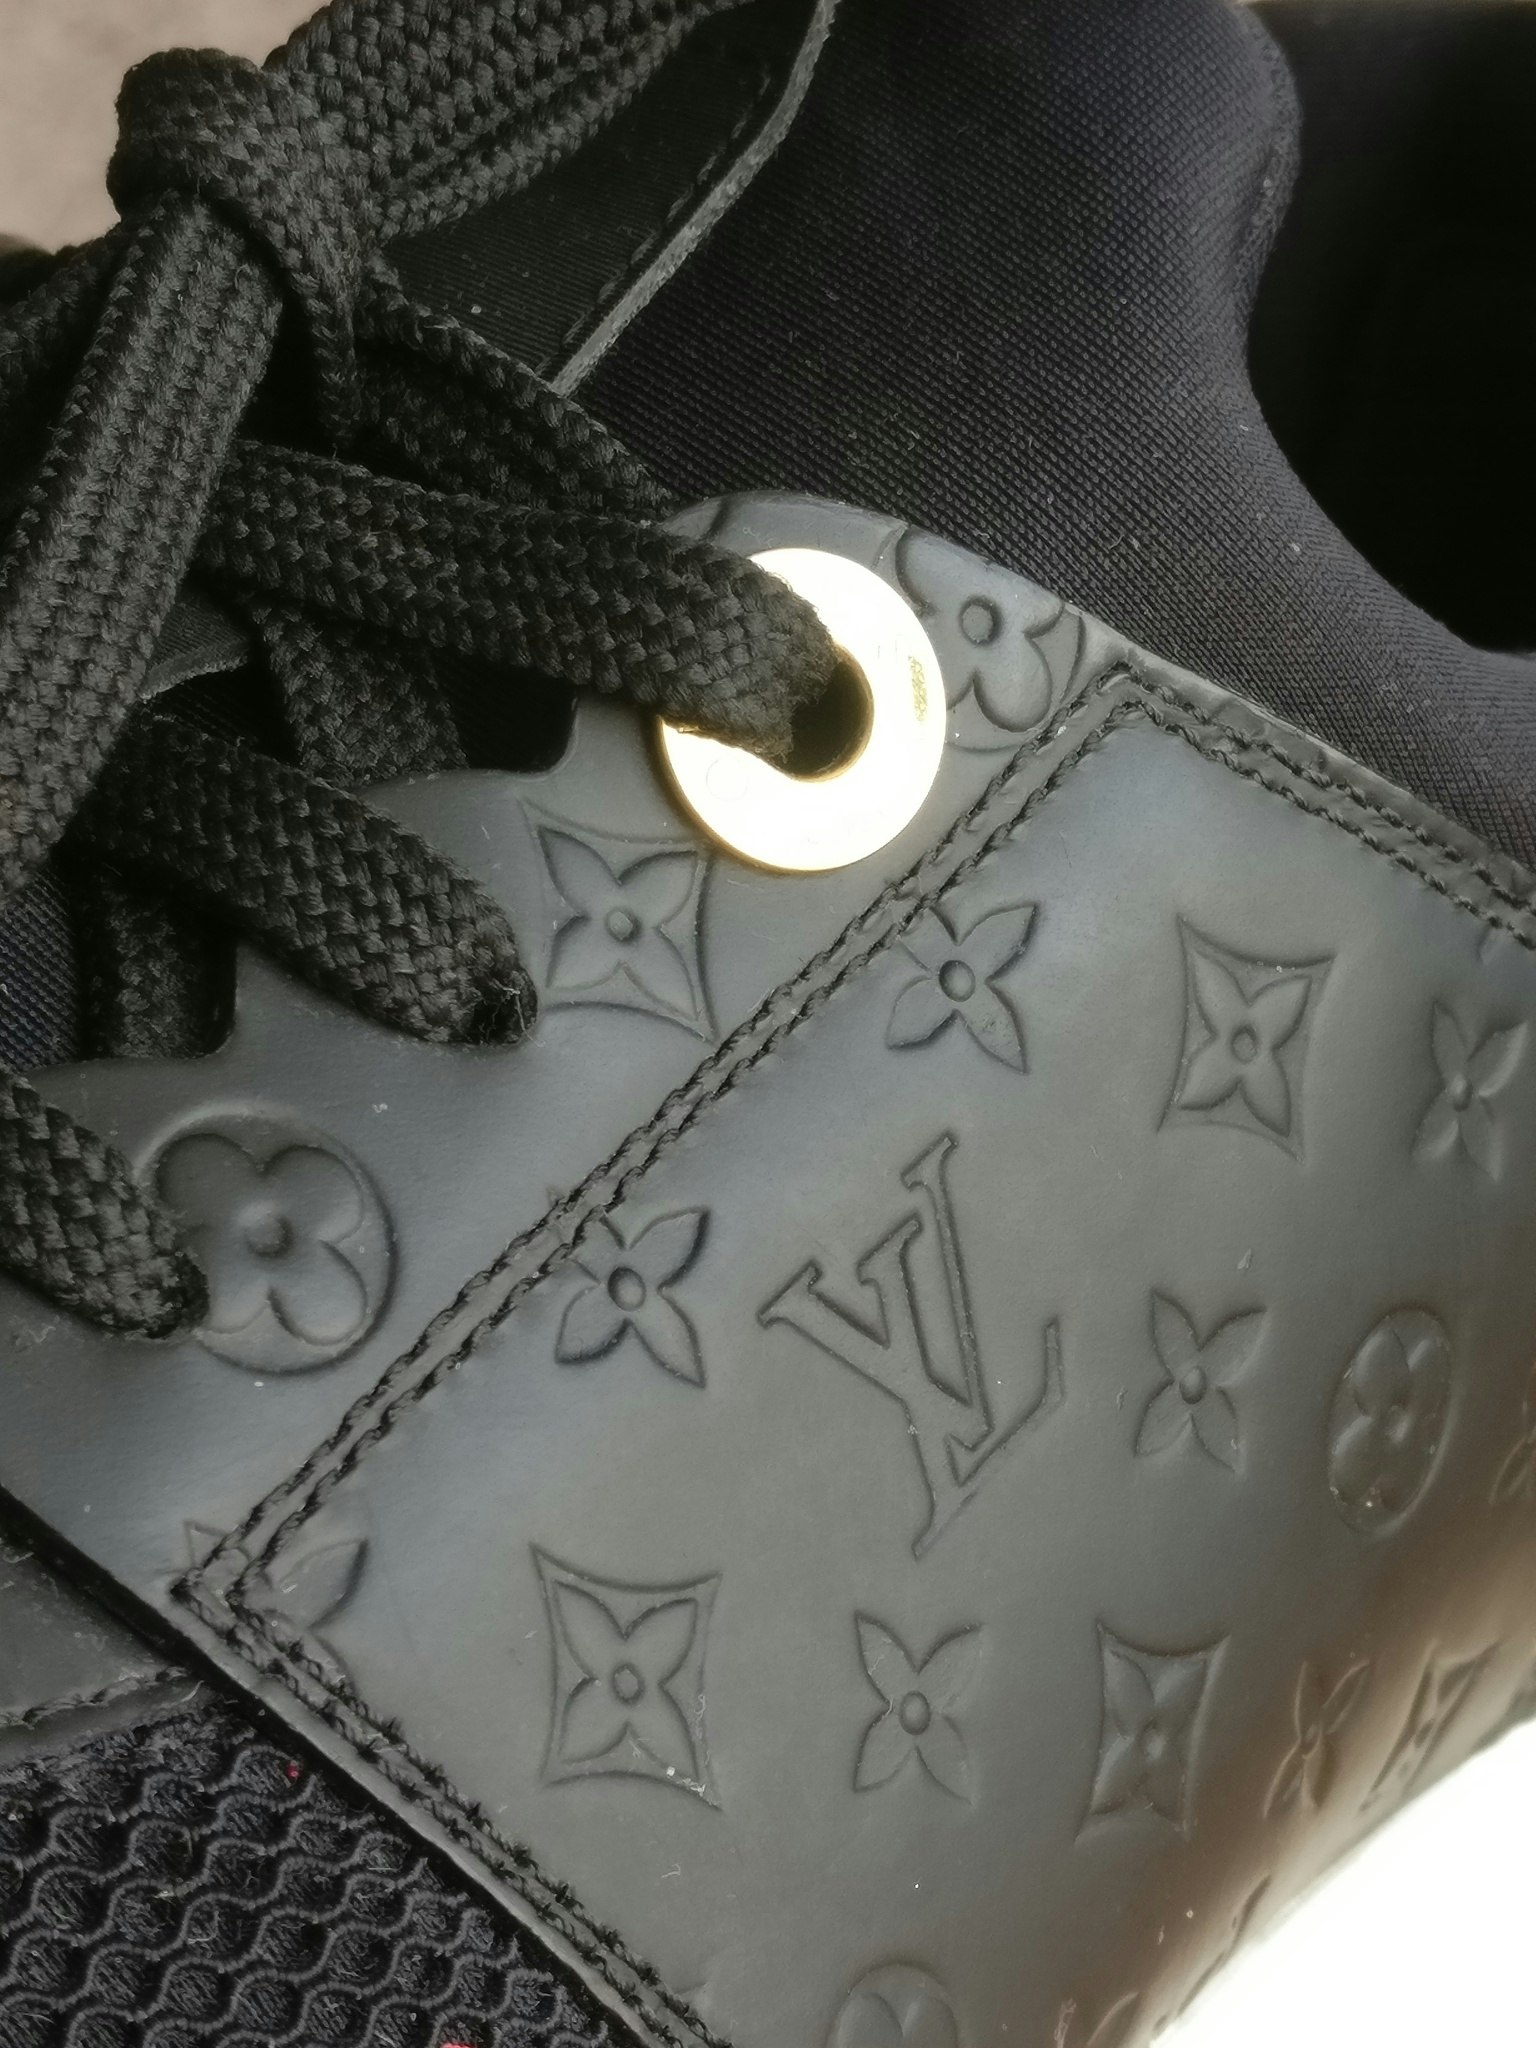 Louis Vuitton Aftergame Sock Sneakers. – Beccas Bags